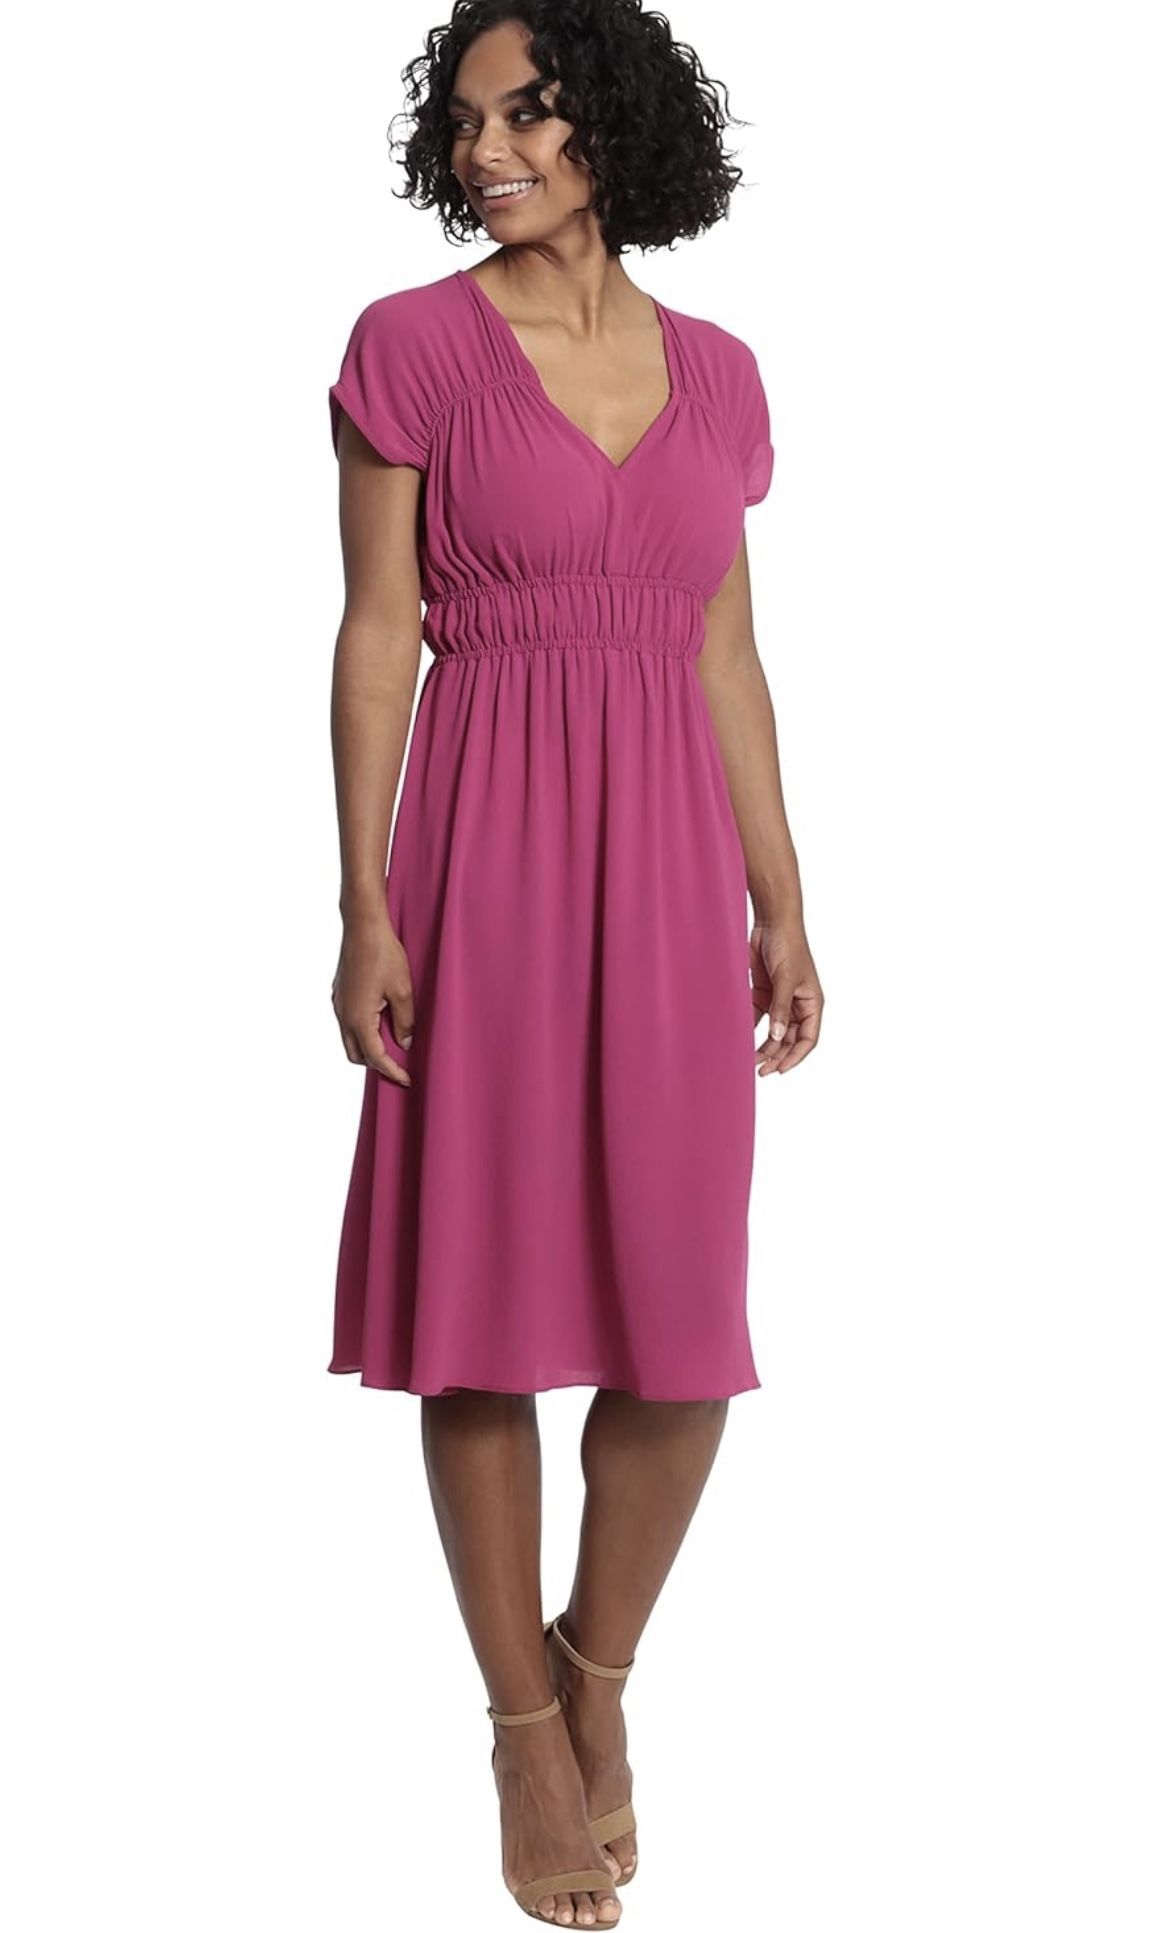 Fuchsia V-neck Dress With Ruching at Shoulders & Waist.